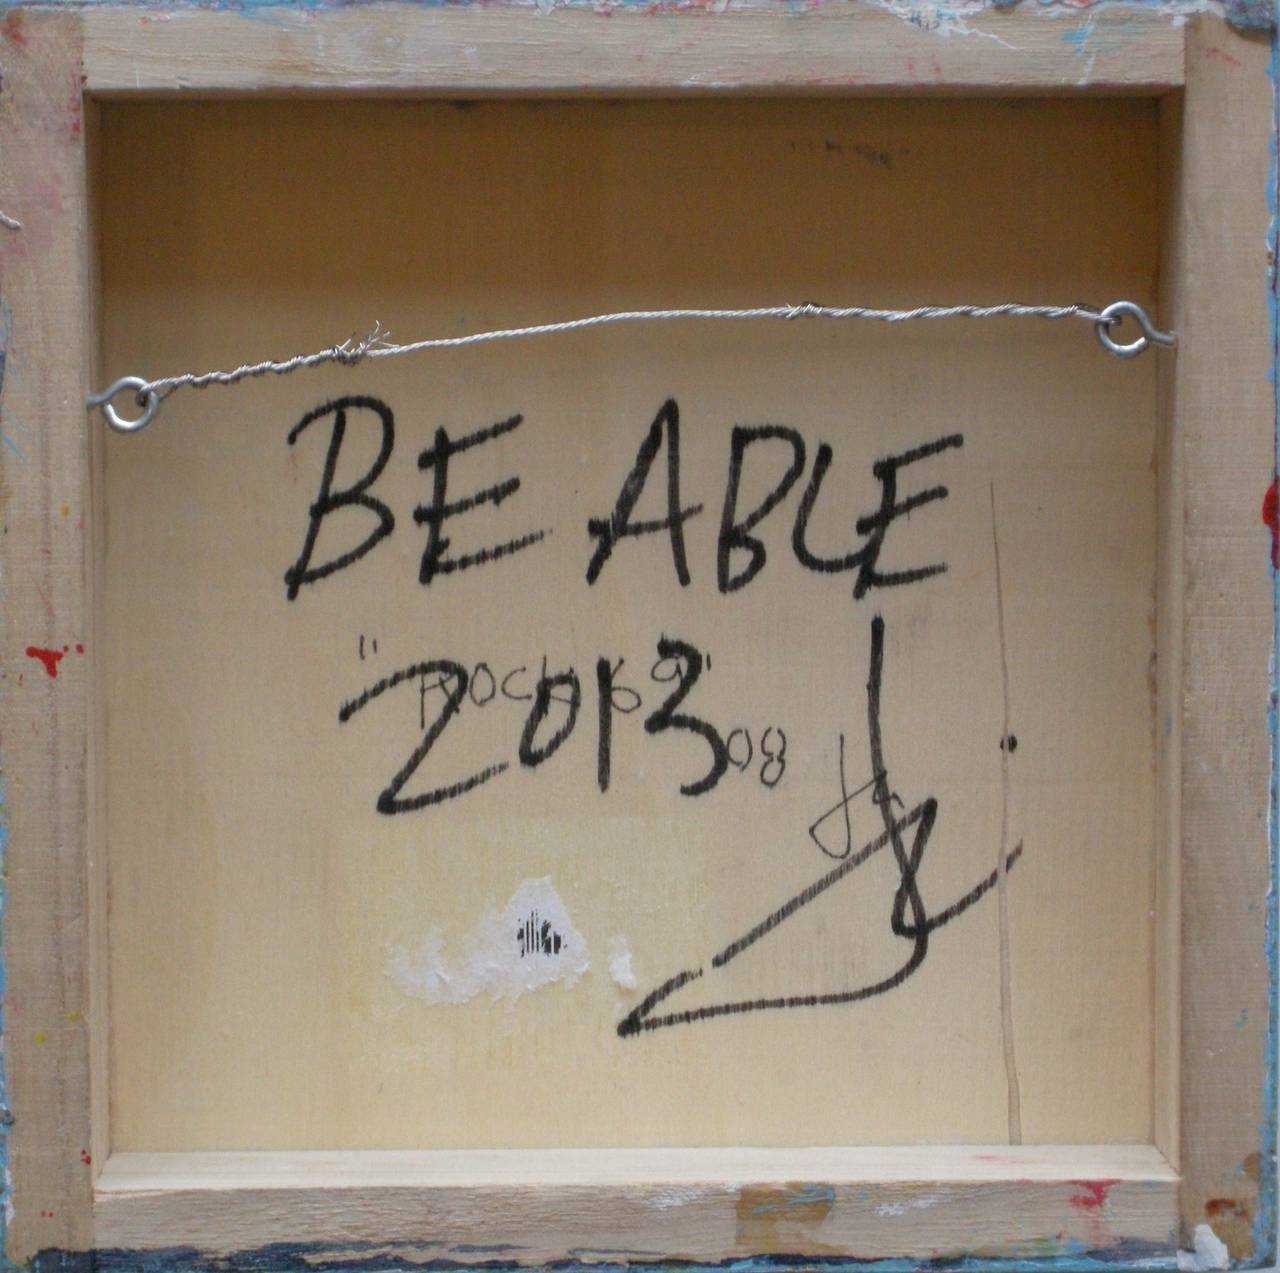 Be Able - Painting by J. Mclaughlin